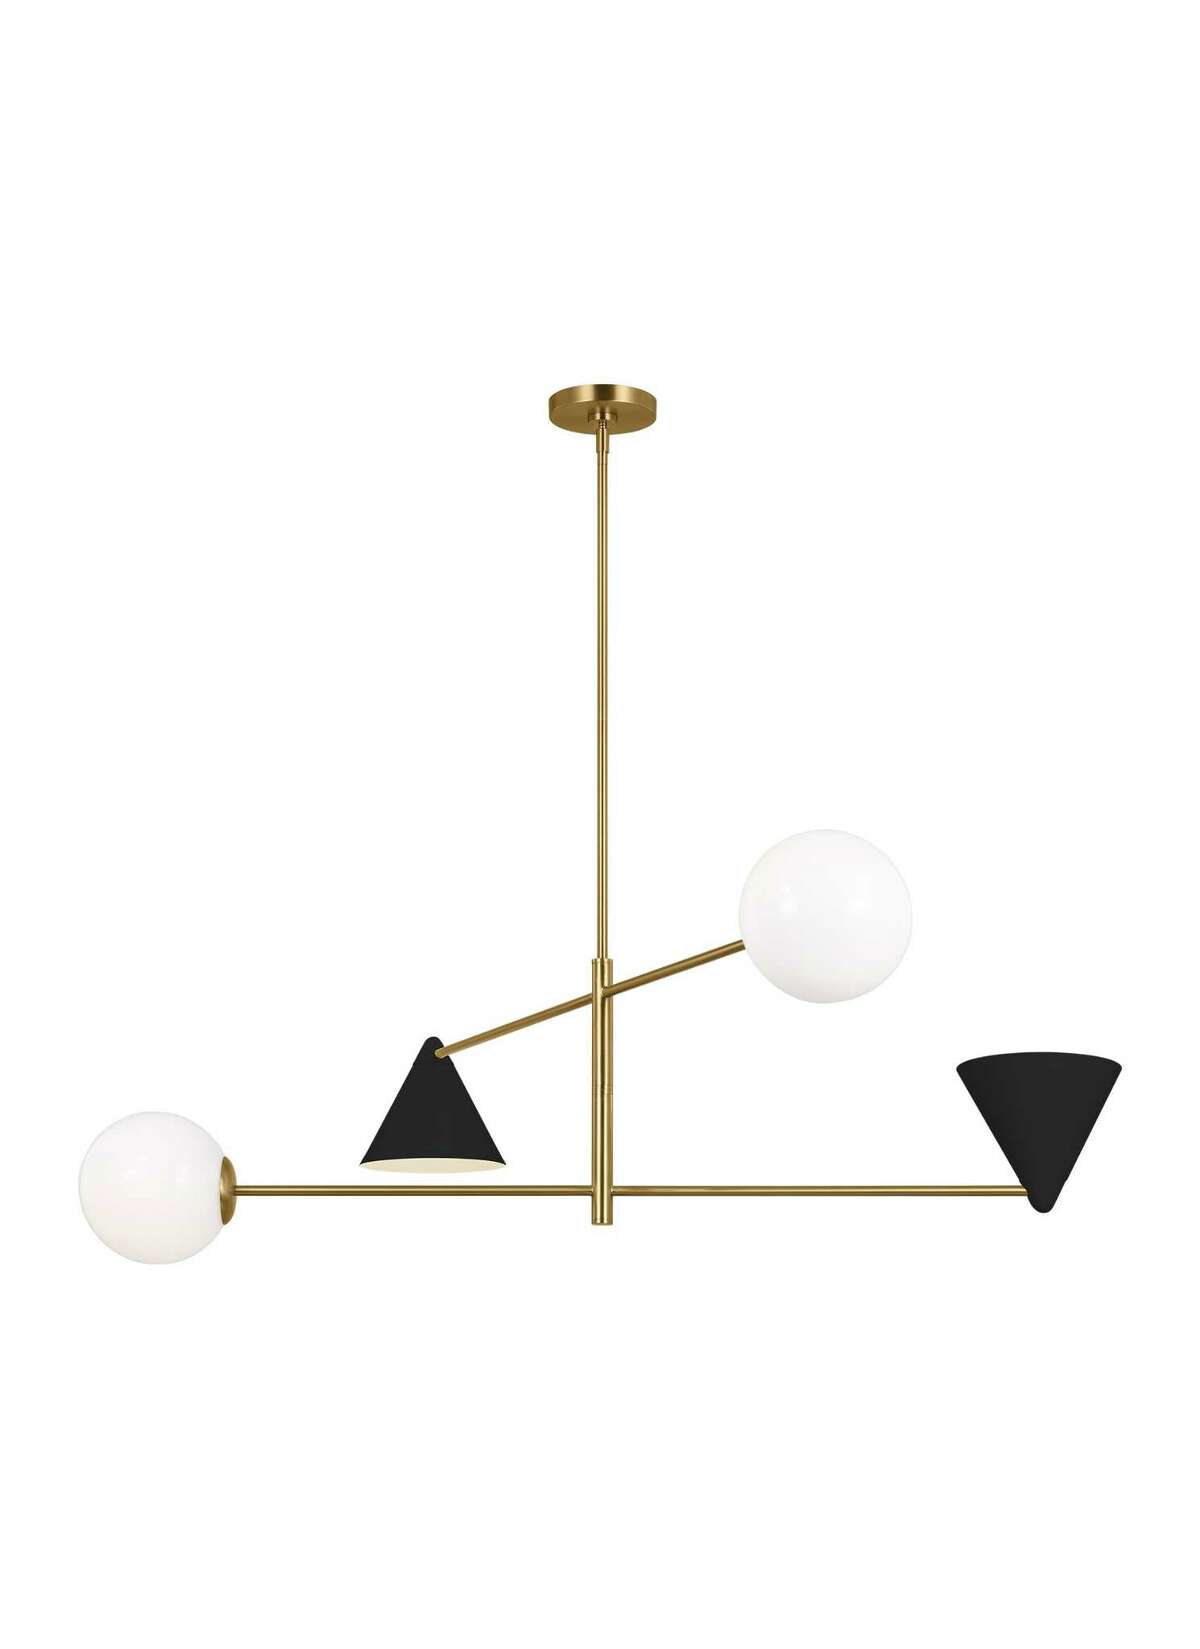 AERIN’s Cosmo large chandelier by Visual Comfort & Co. is brass with either white or white and midnight black shades, $779.97. The Cosmo series includes indoor and outdoor wall sconces and this chandelier in three sizes, 28, 36 and 48 inches wide.